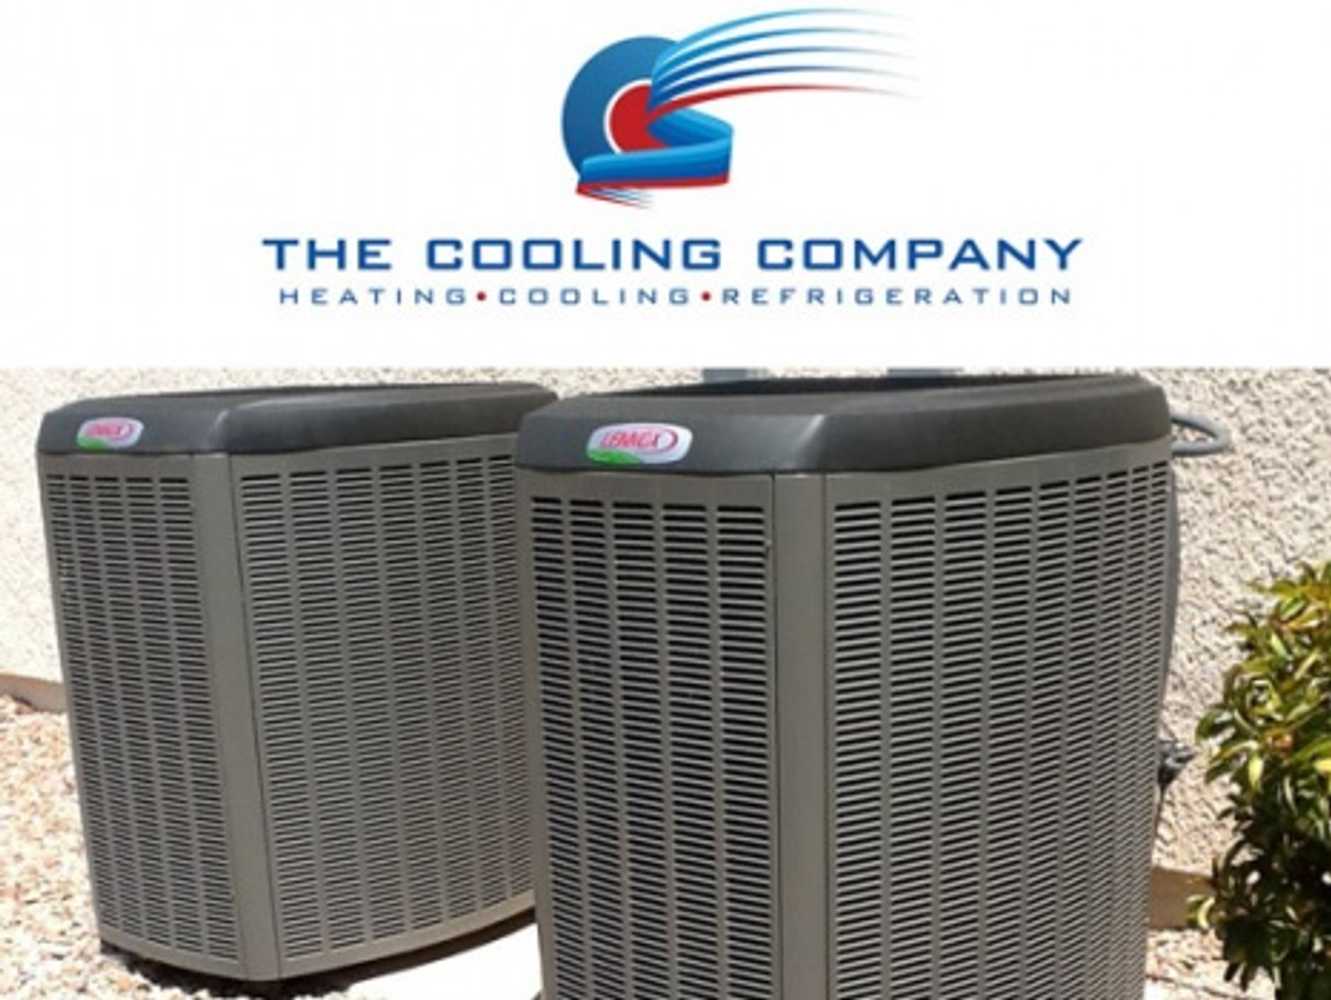 The Cooling Company Project